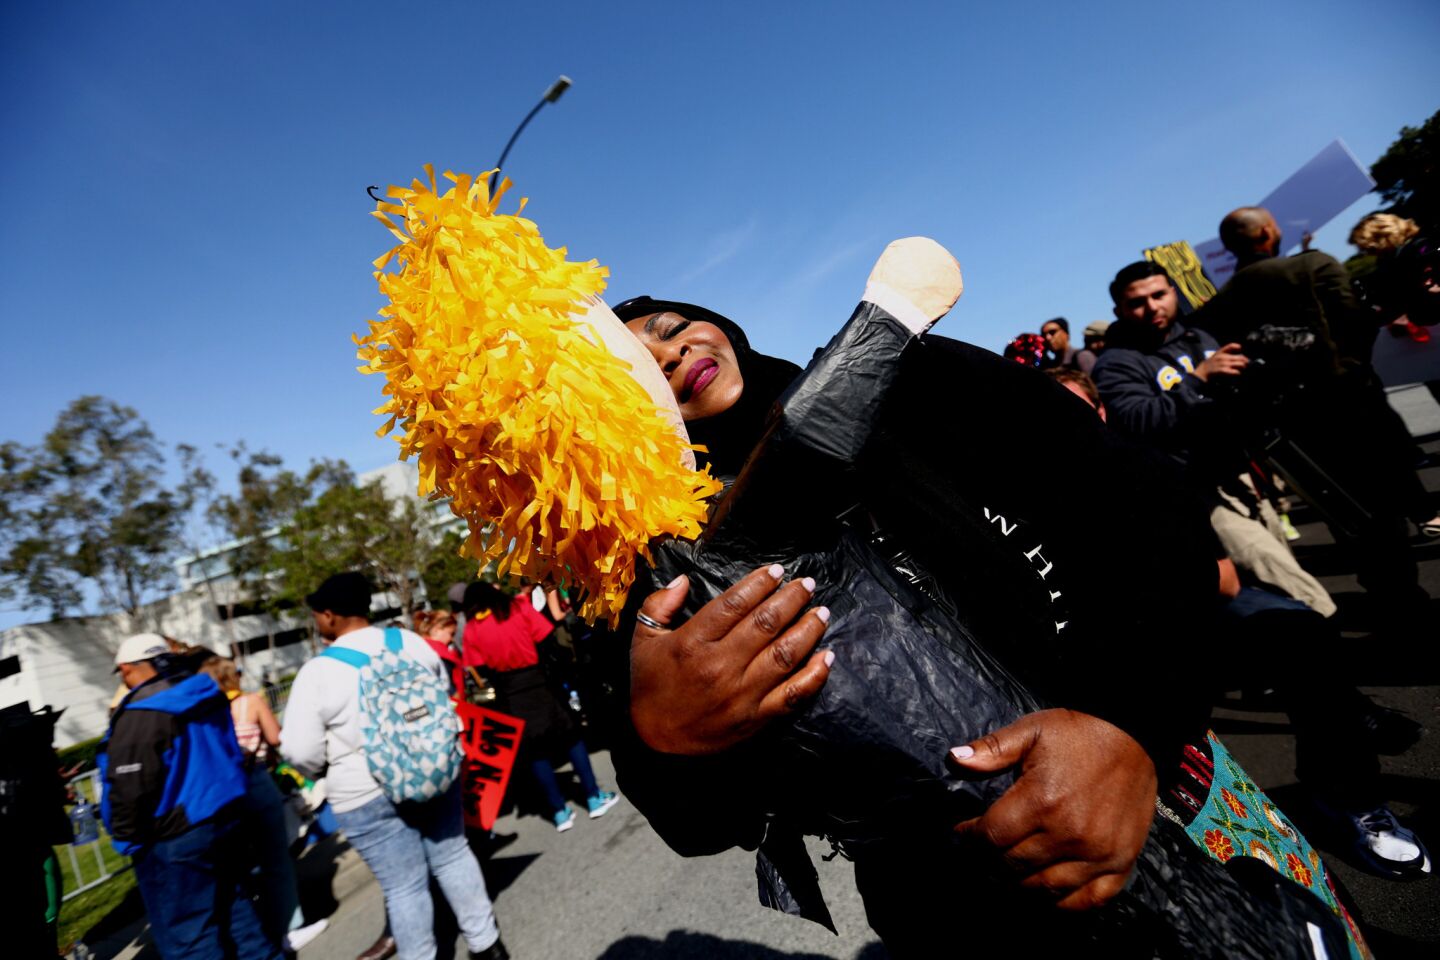 Rabia Keeble hugs a Donald Trump piñata during a protest outside the California Republican Party convention in Burlingame.